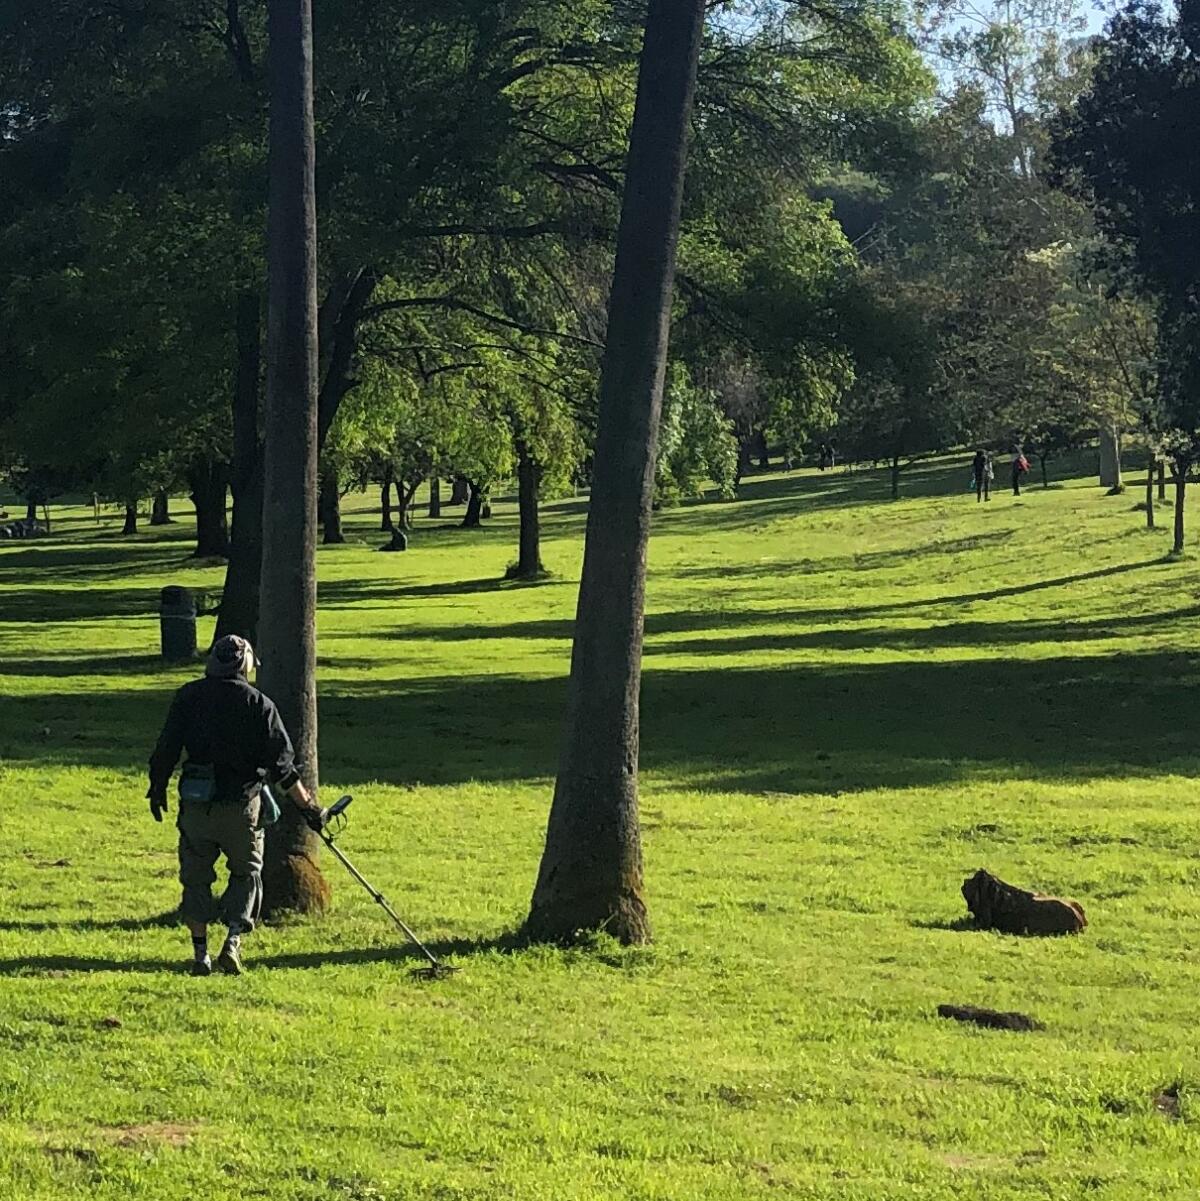 Zac Holtzman and his metal detector work the turf of Elysian Park, Los Angeles.